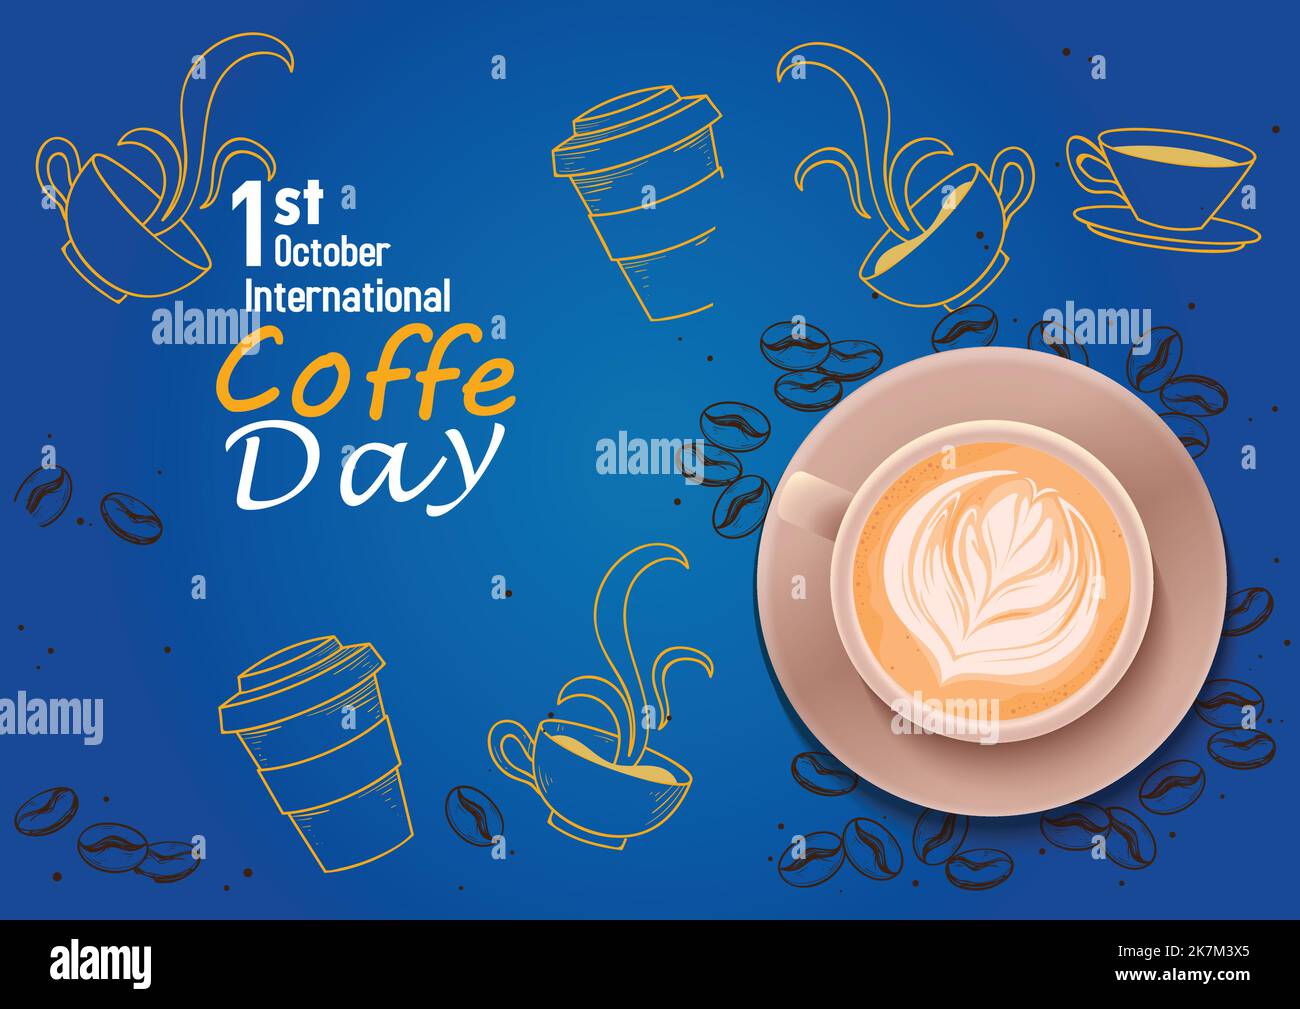 international coffee day vector graphic illustration with beans Stock Vector